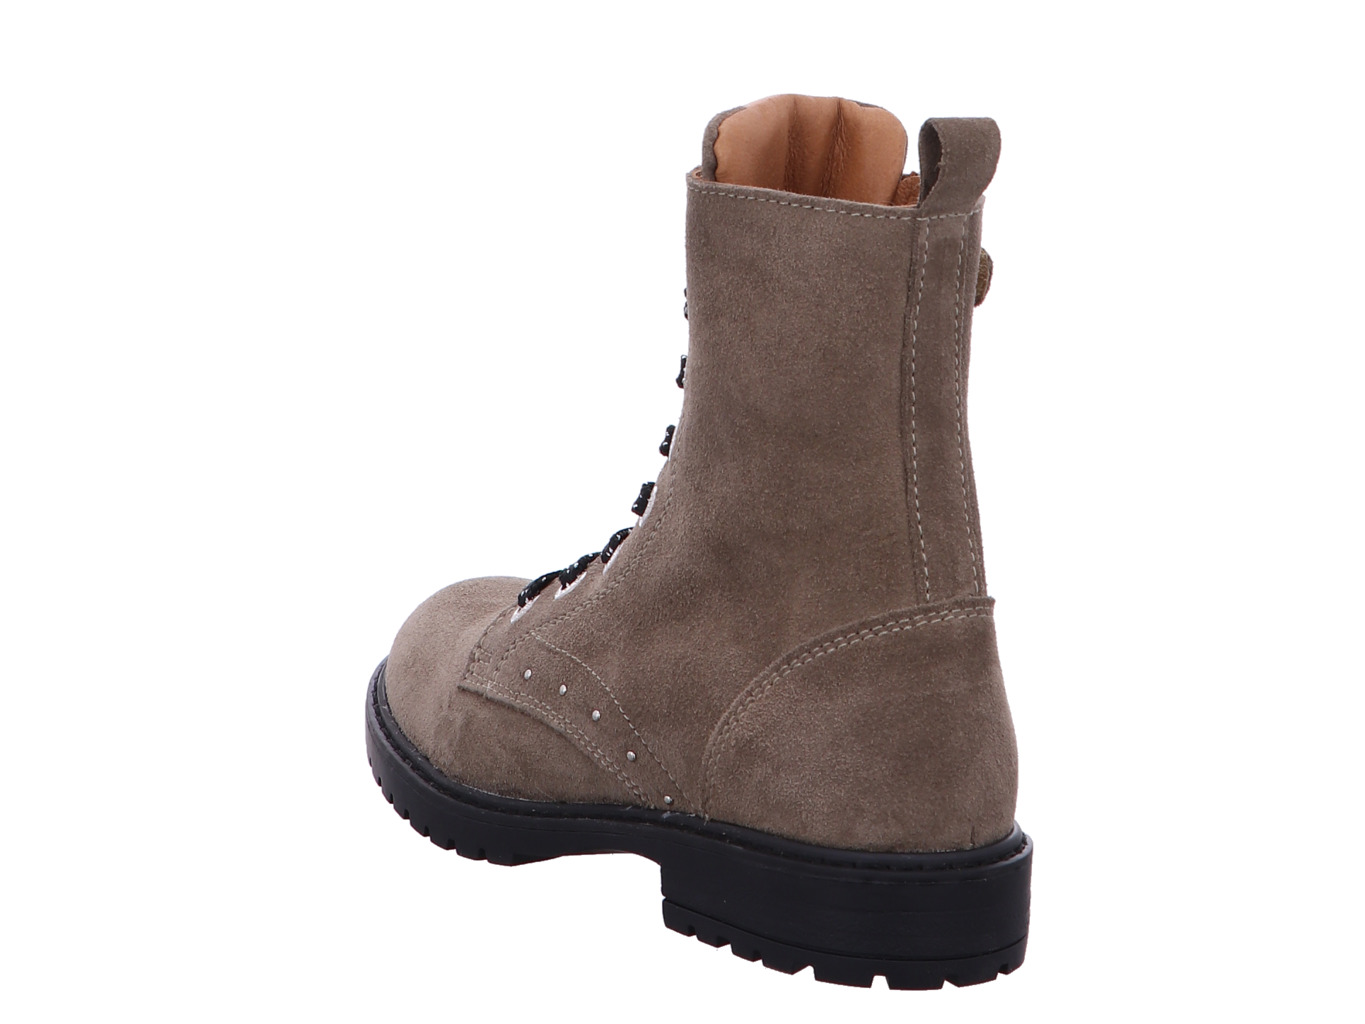 develab_girls_mid_boot_laces_42850_233_5148